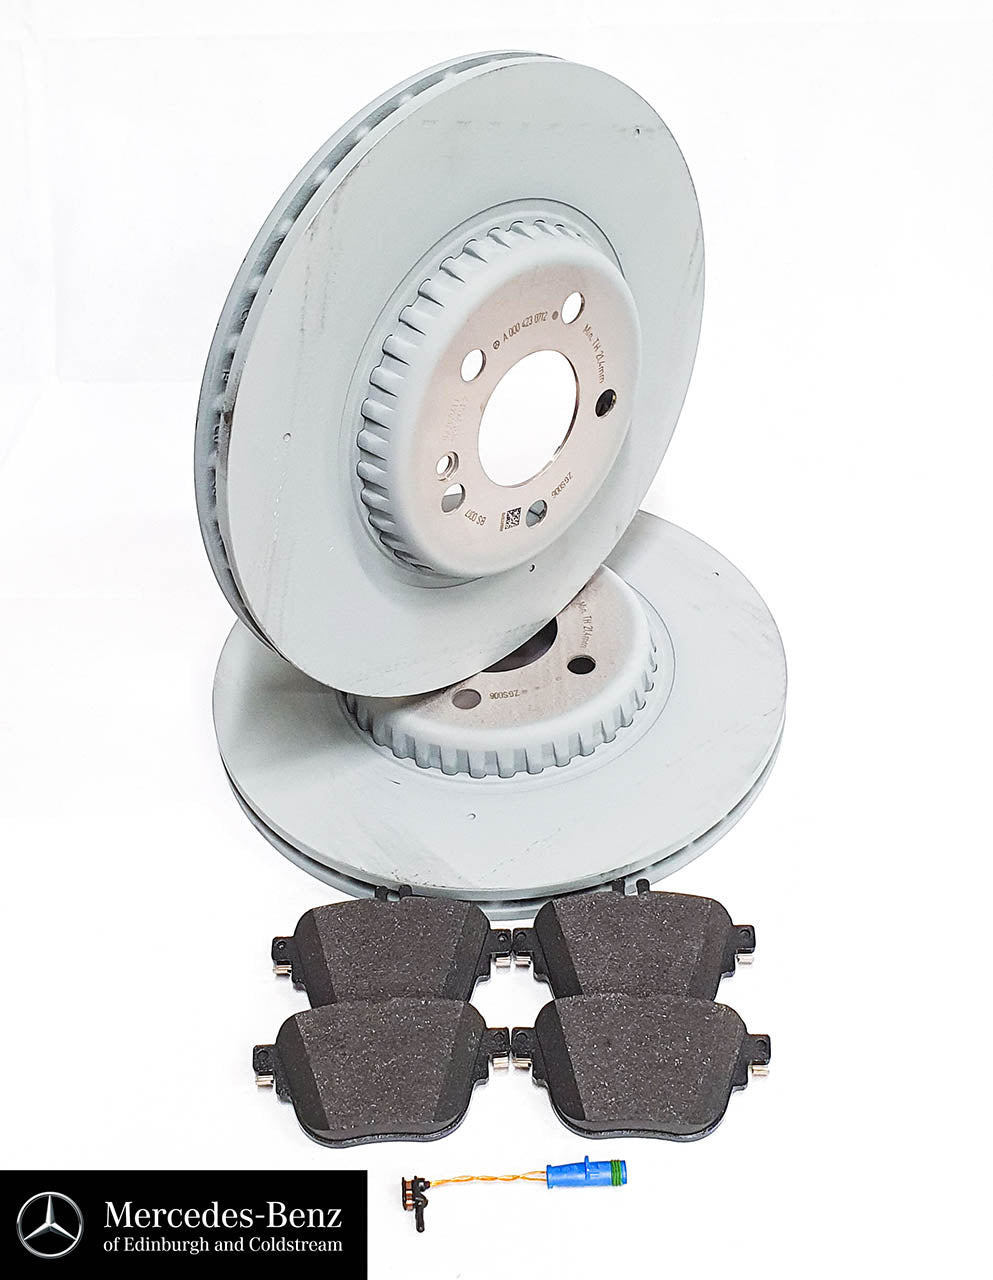 Genuine Mercedes-Benz compound light brake discs and pads - REAR - selected E Class C Class